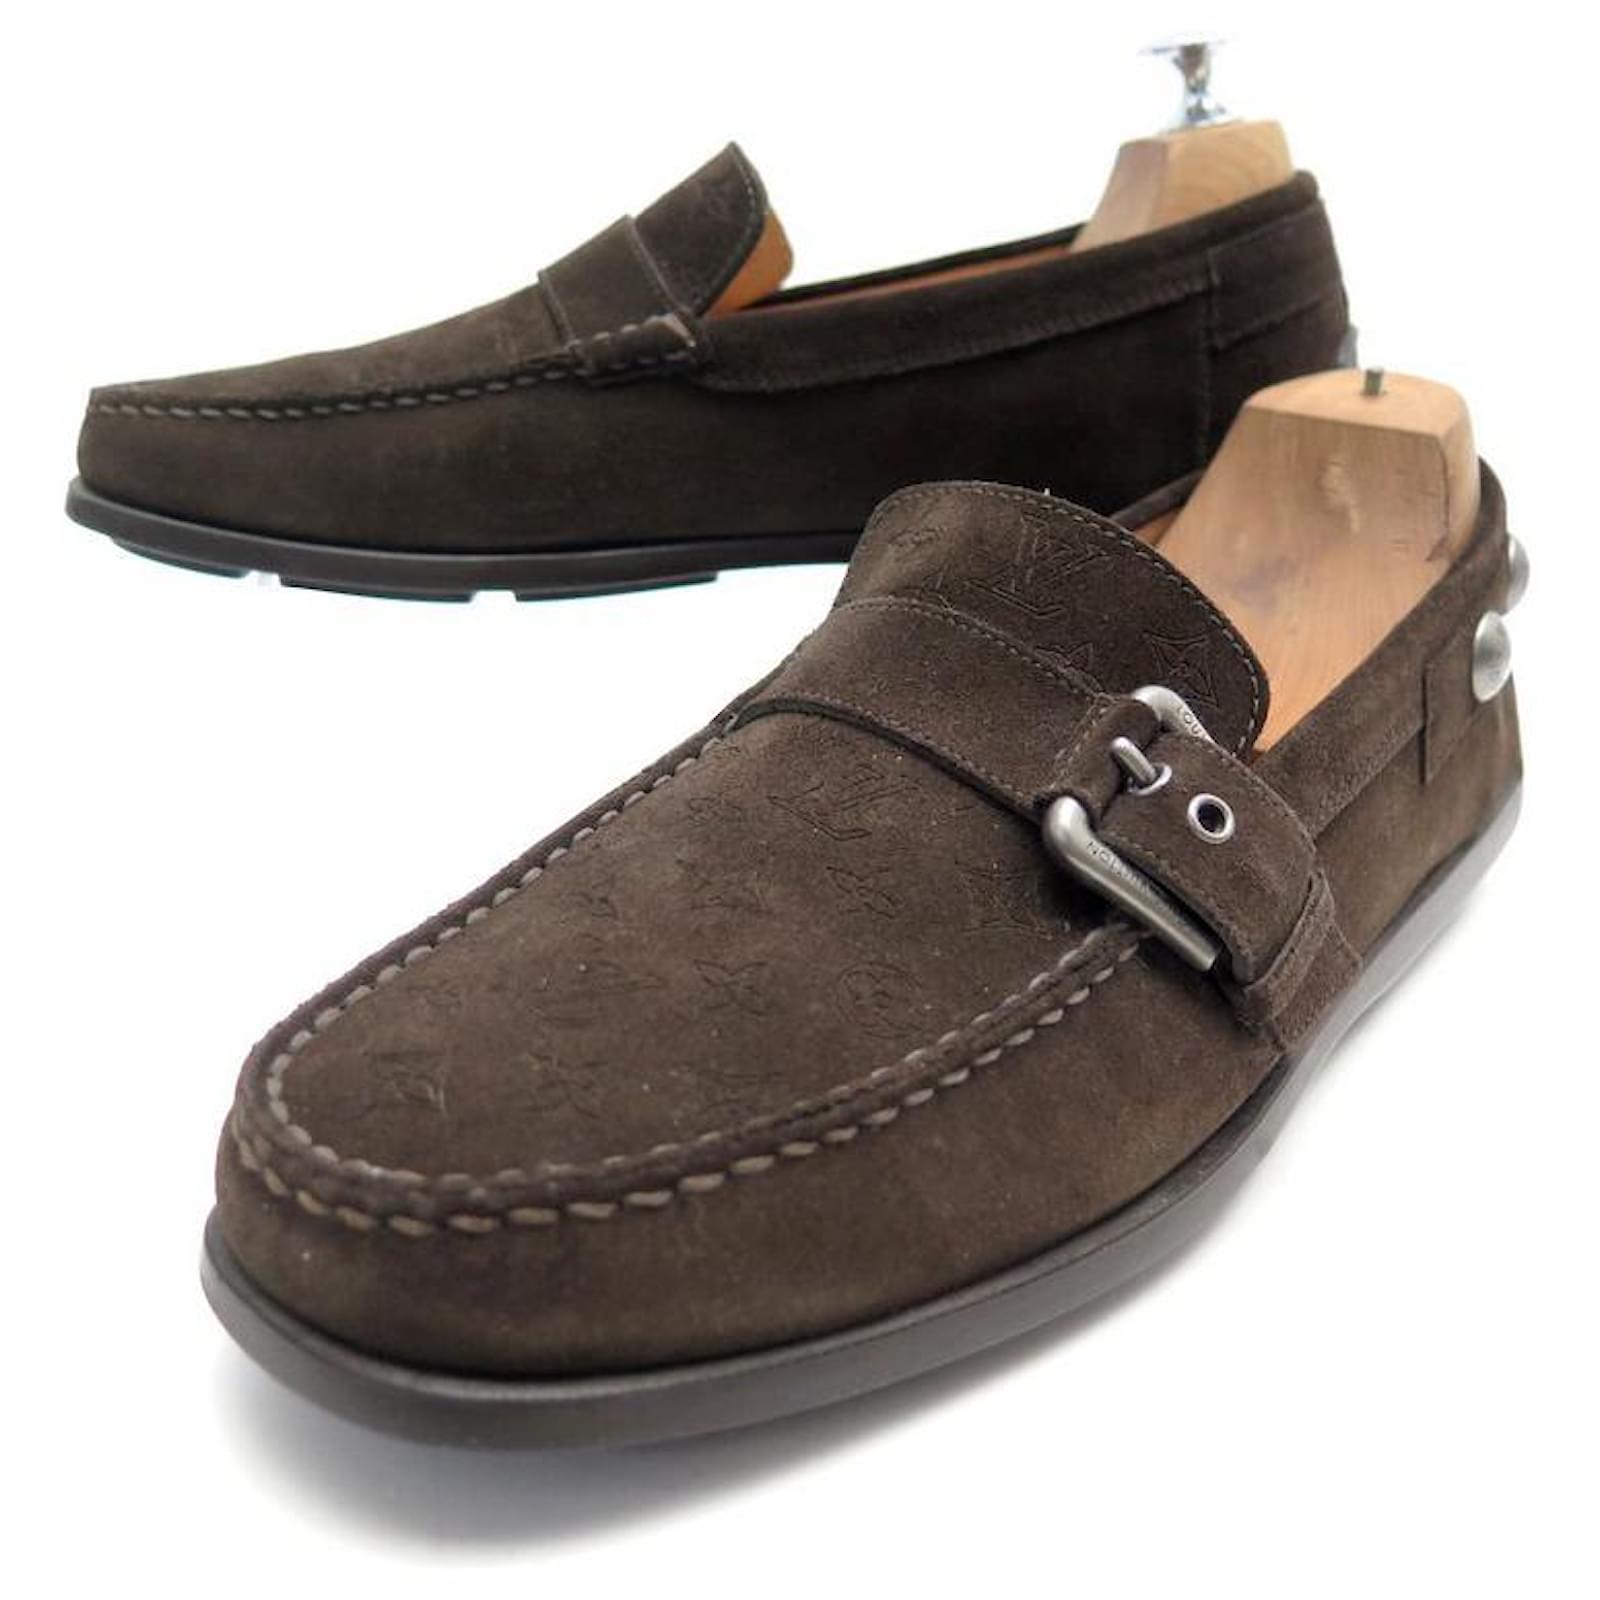 LOUIS VUITTON SHOES LOAFERS WITH BUCKLE 8 42 SUEDE MONOGRAM